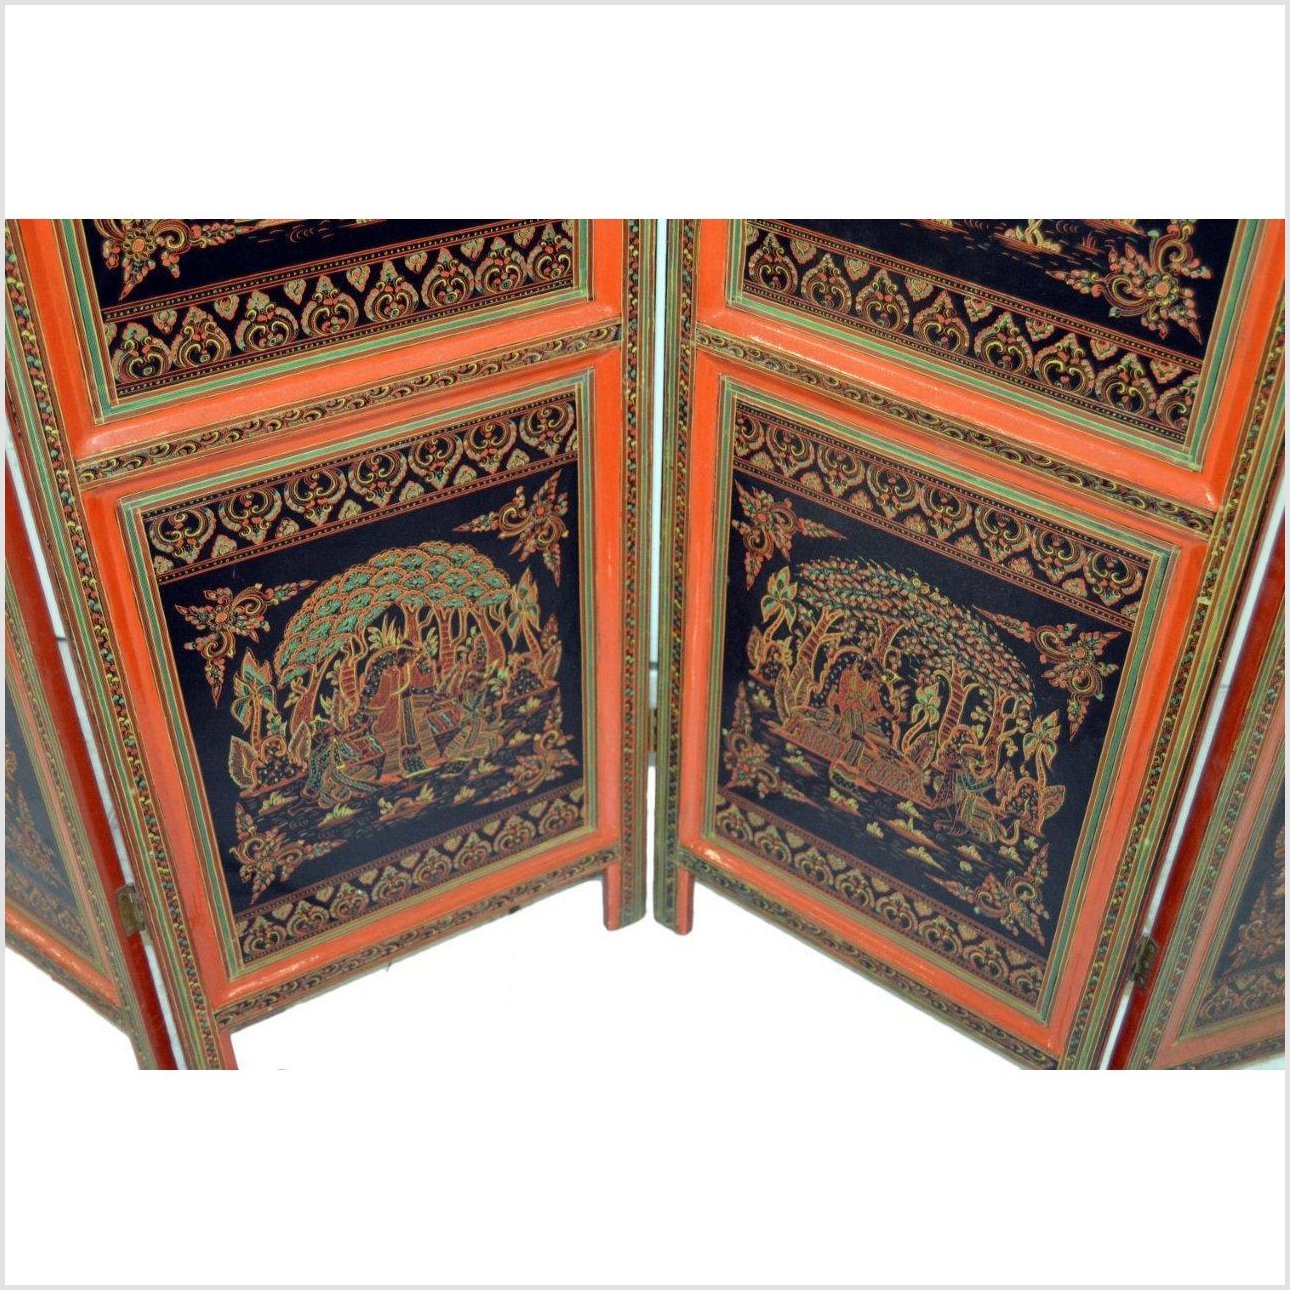 4-Panel Middle Eastern Art Inspired Screen-YN2844-23. Asian & Chinese Furniture, Art, Antiques, Vintage Home Décor for sale at FEA Home